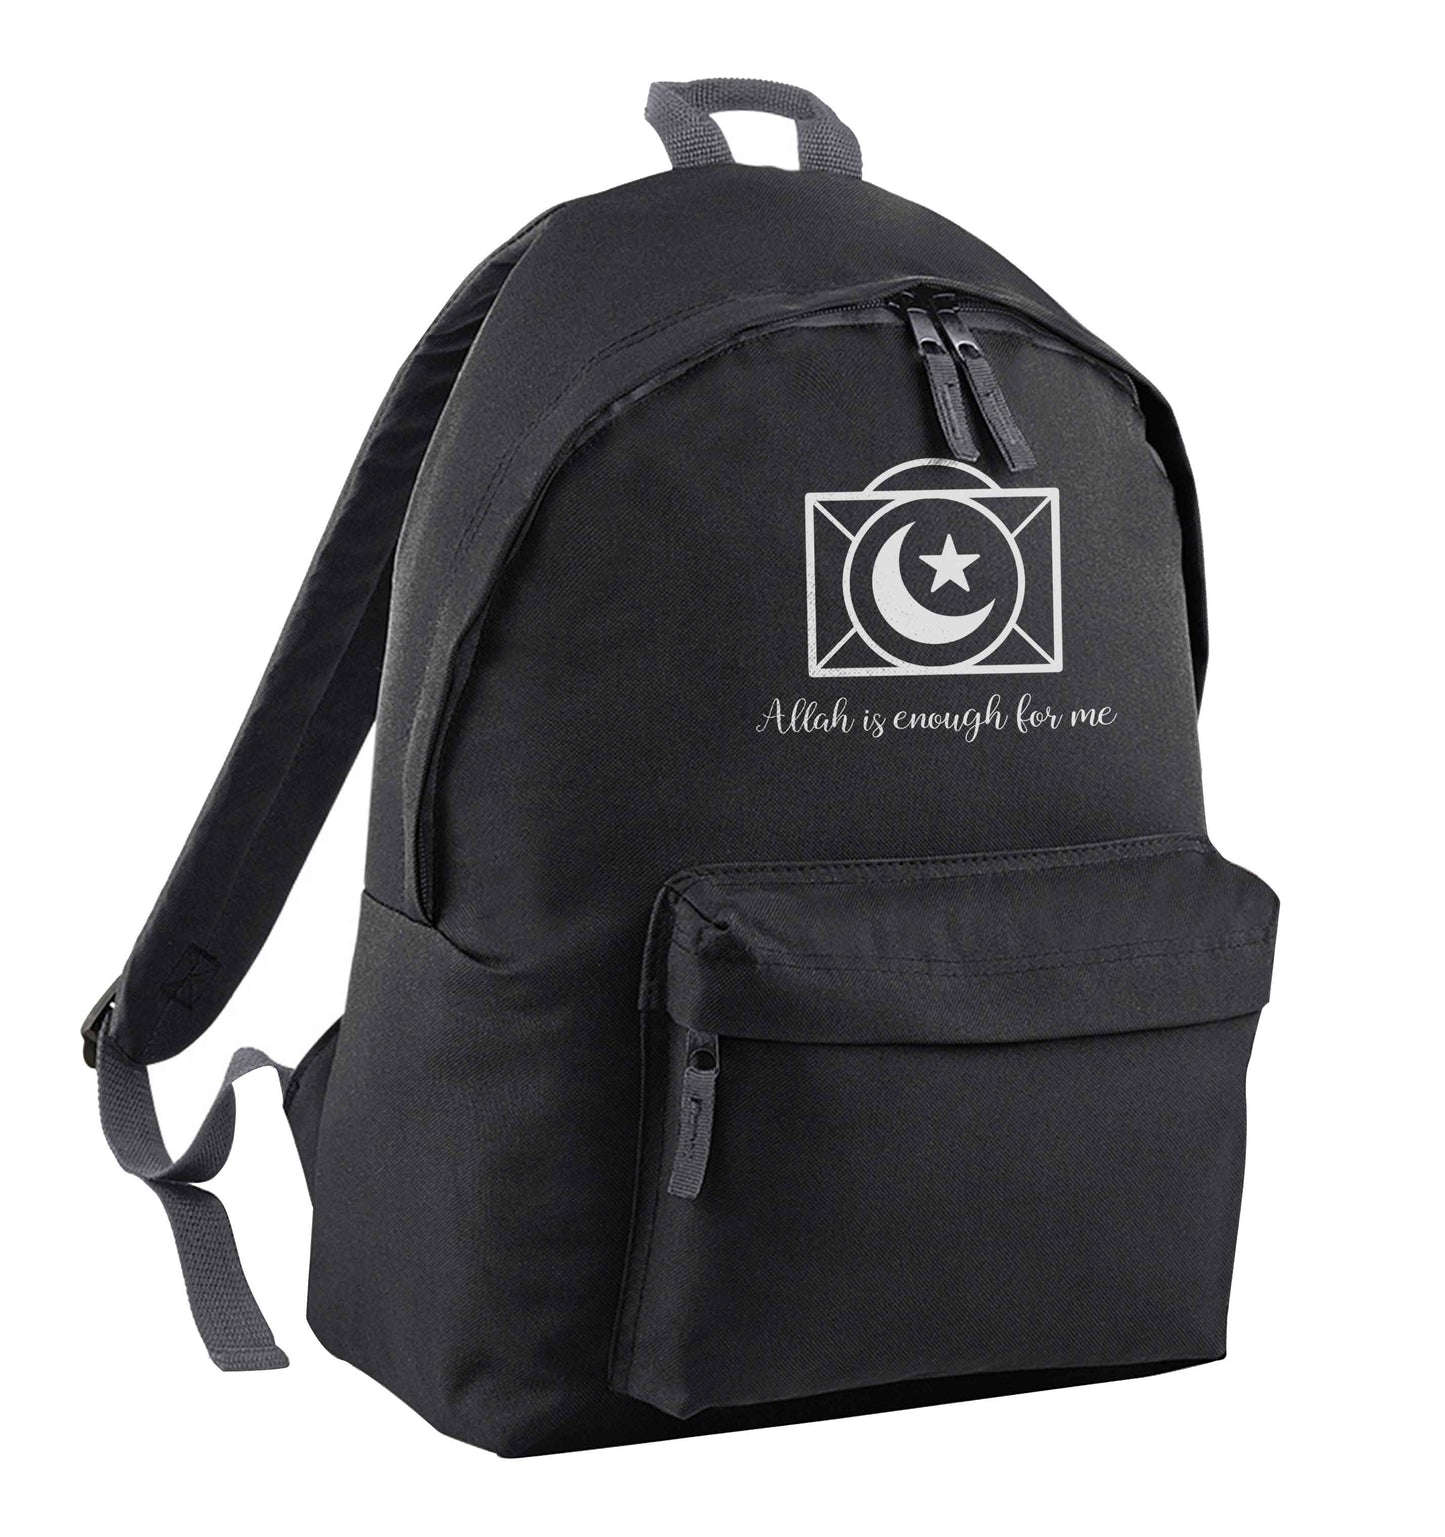 Allah is enough for me black adults backpack